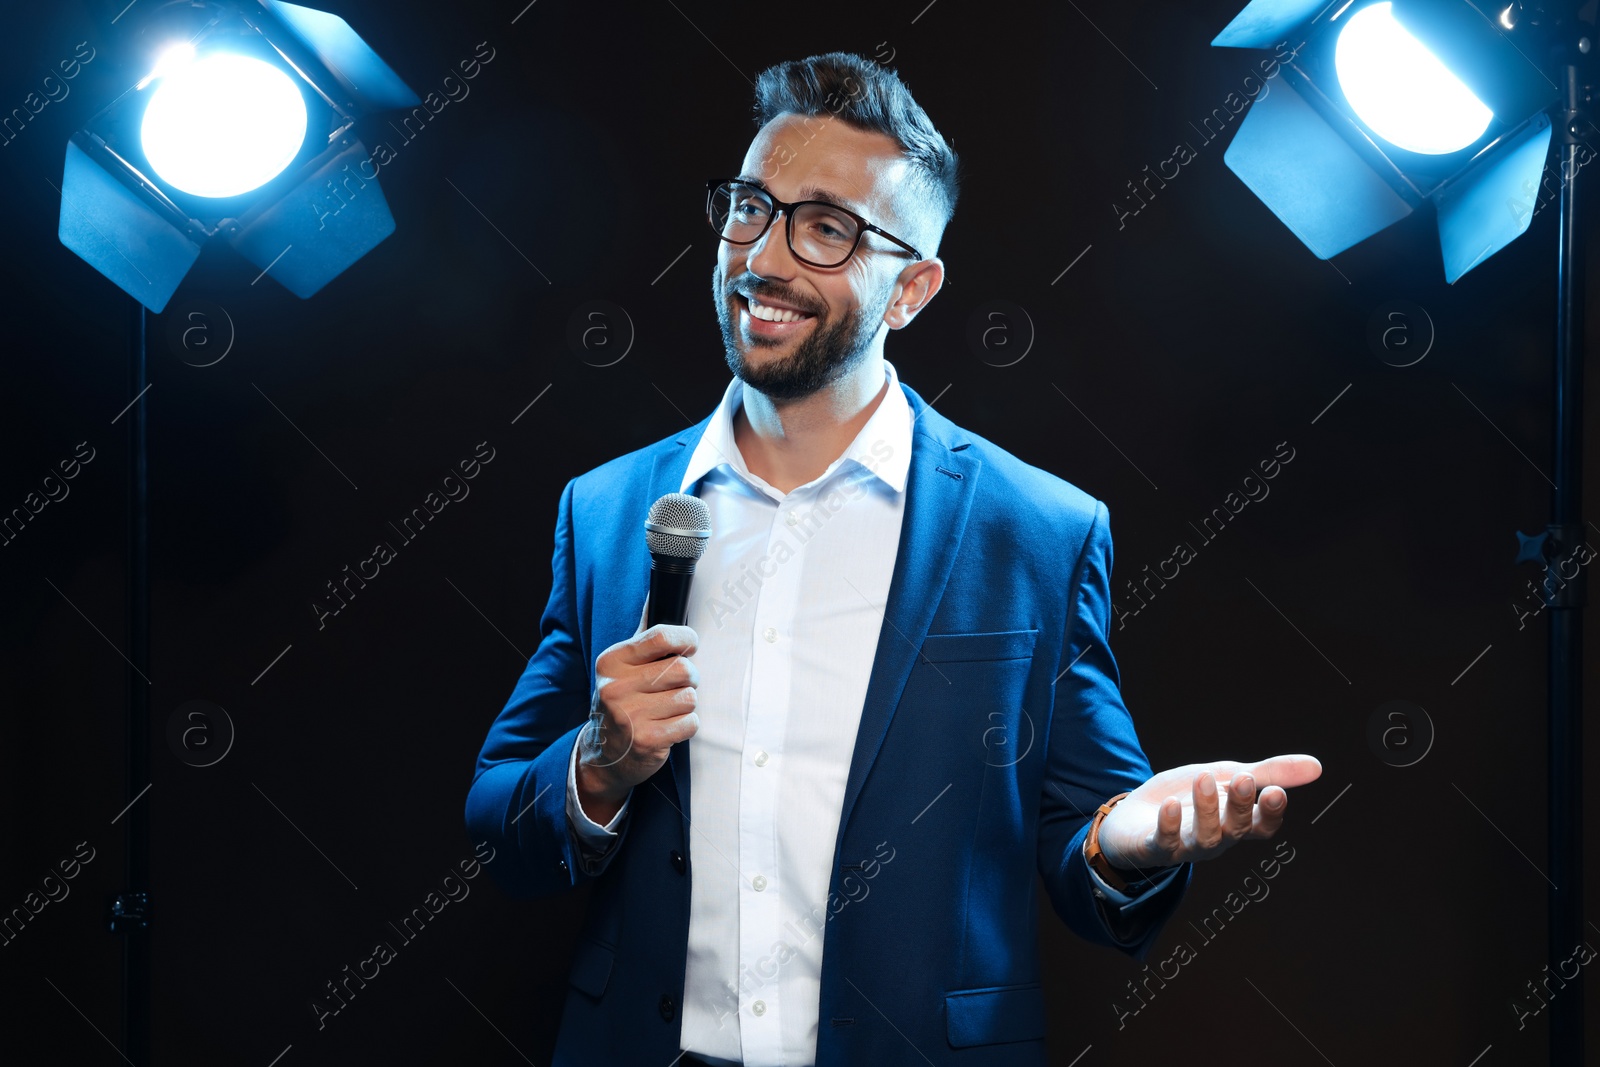 Photo of Motivational speaker with microphone performing on stage